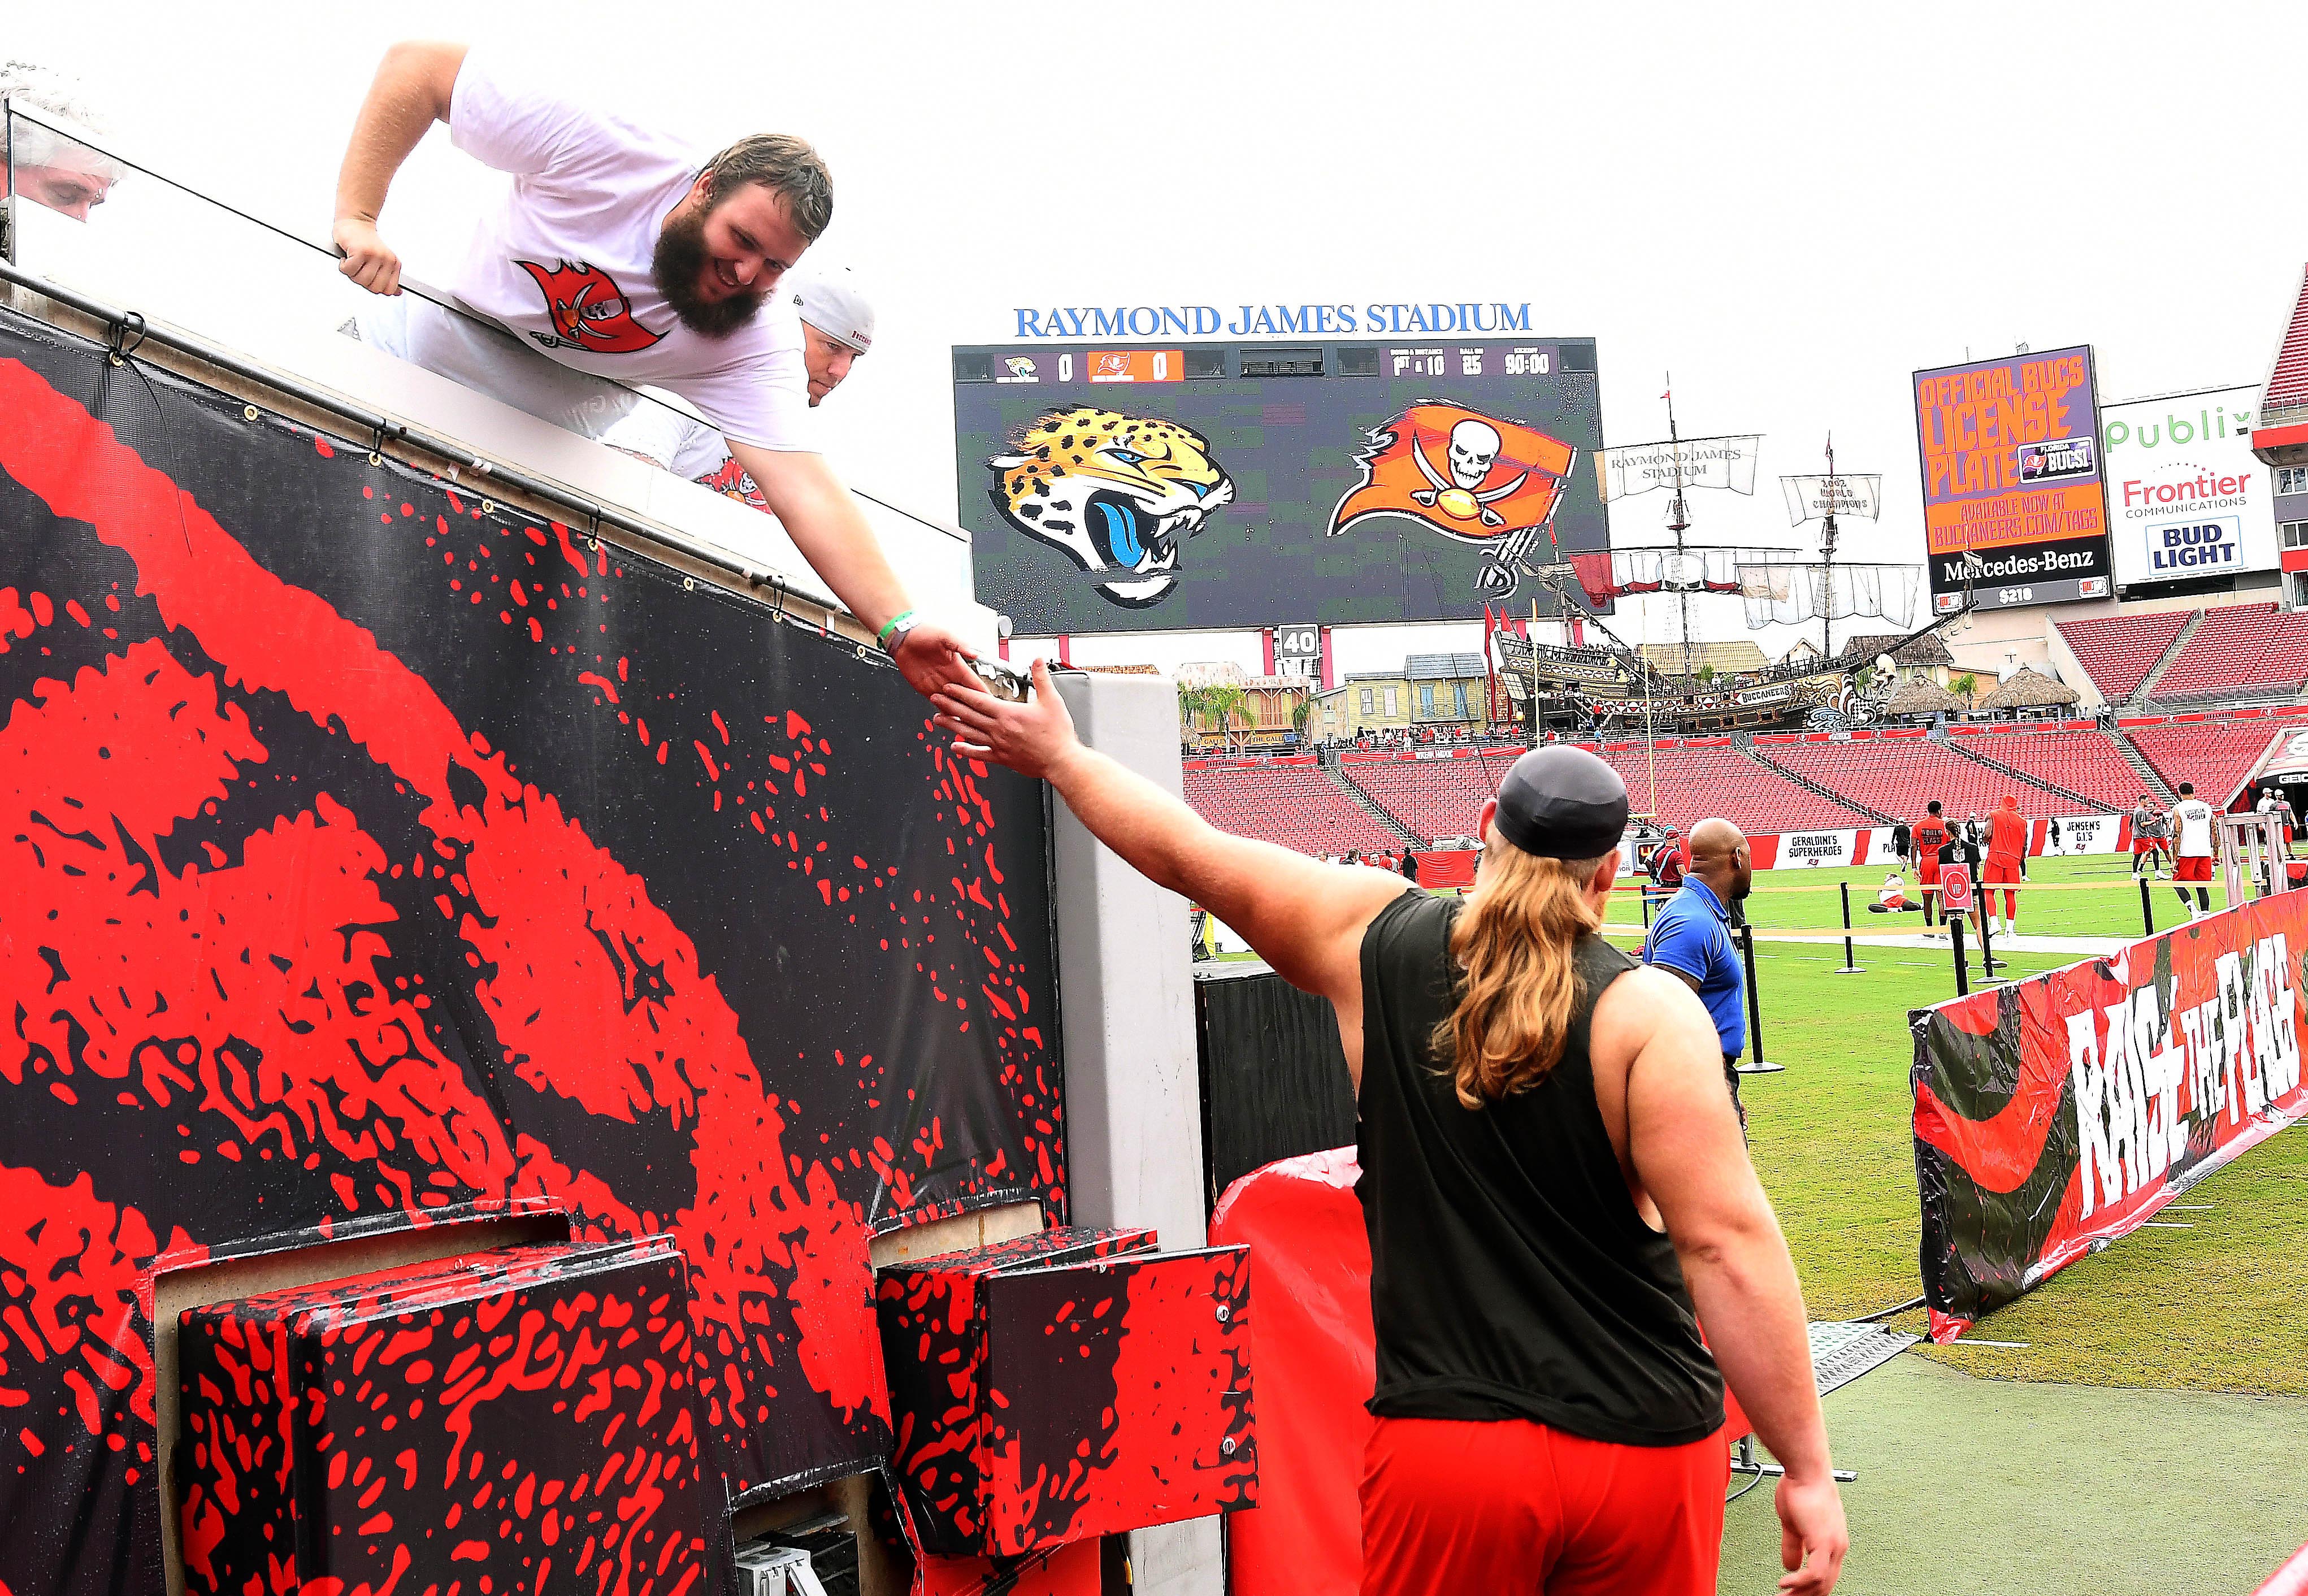 Vinny Curry and Beau Allen, Guys You’d Like to “Have a Beer With”